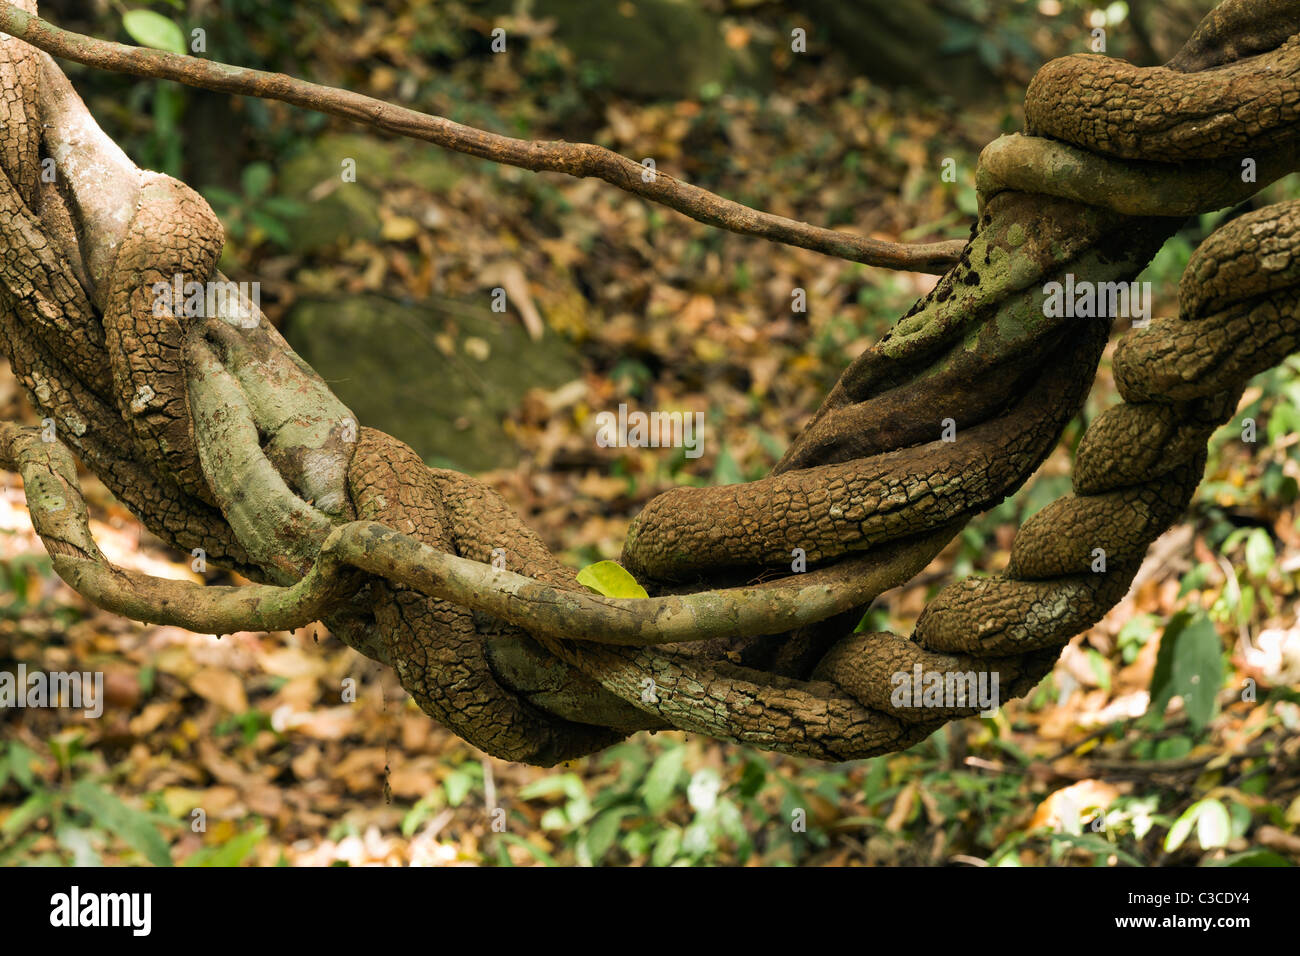 Three different vines doing the twist in the jungle by Kbal Spean, a remote Angkorian site. Stock Photo